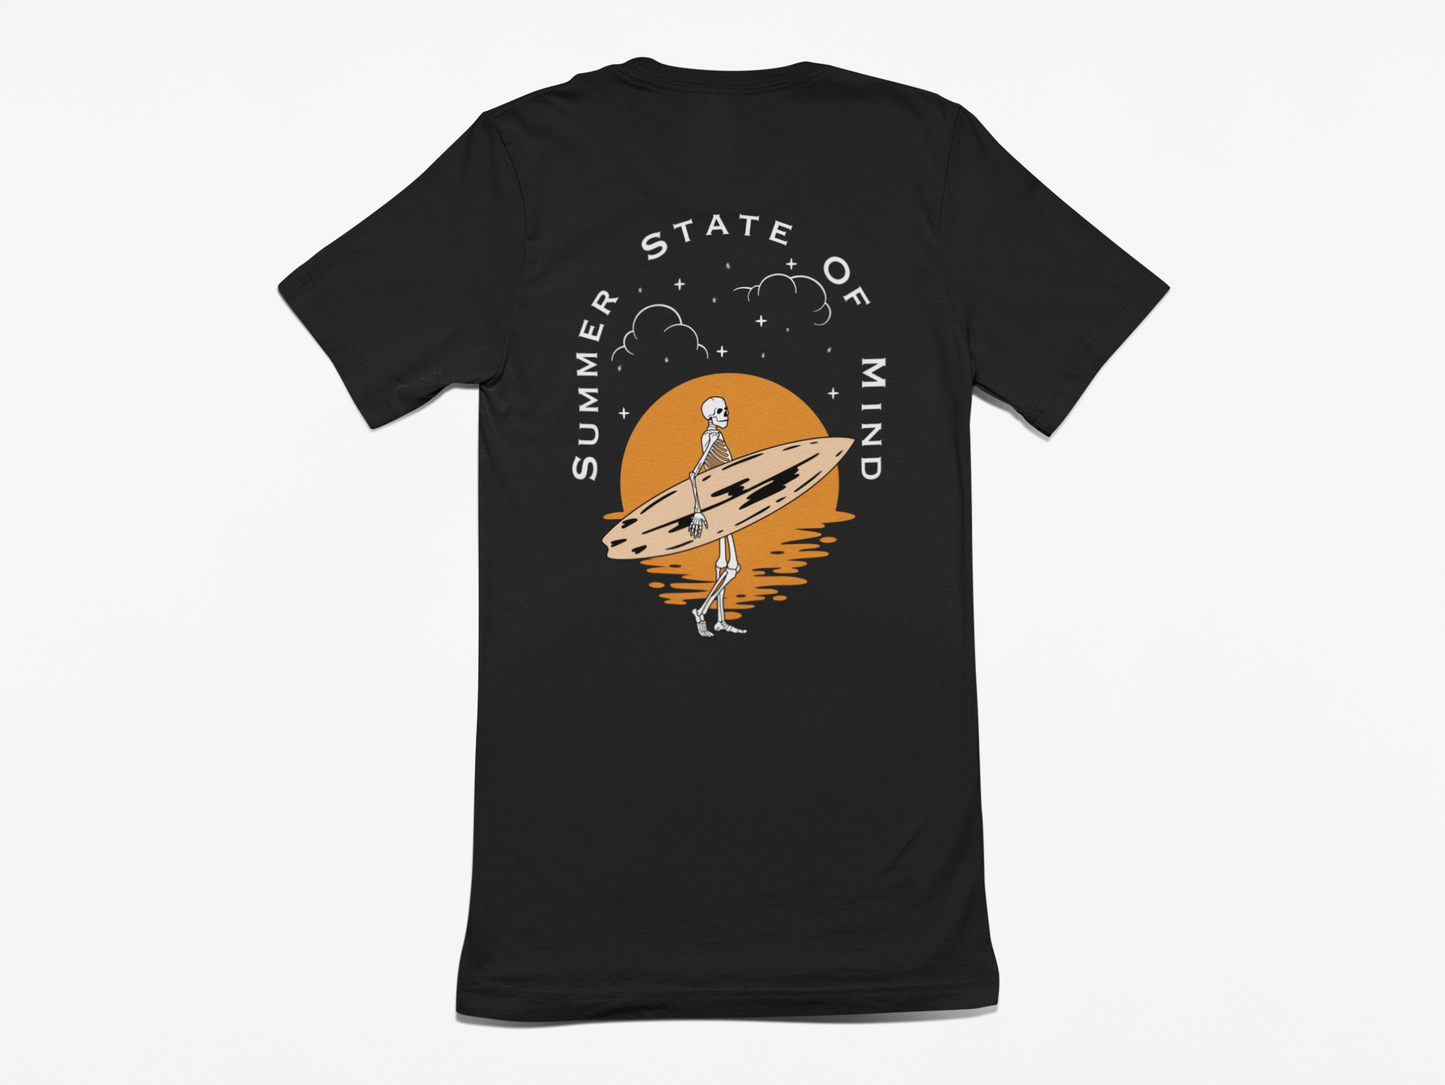 Summer State of Mind Tee